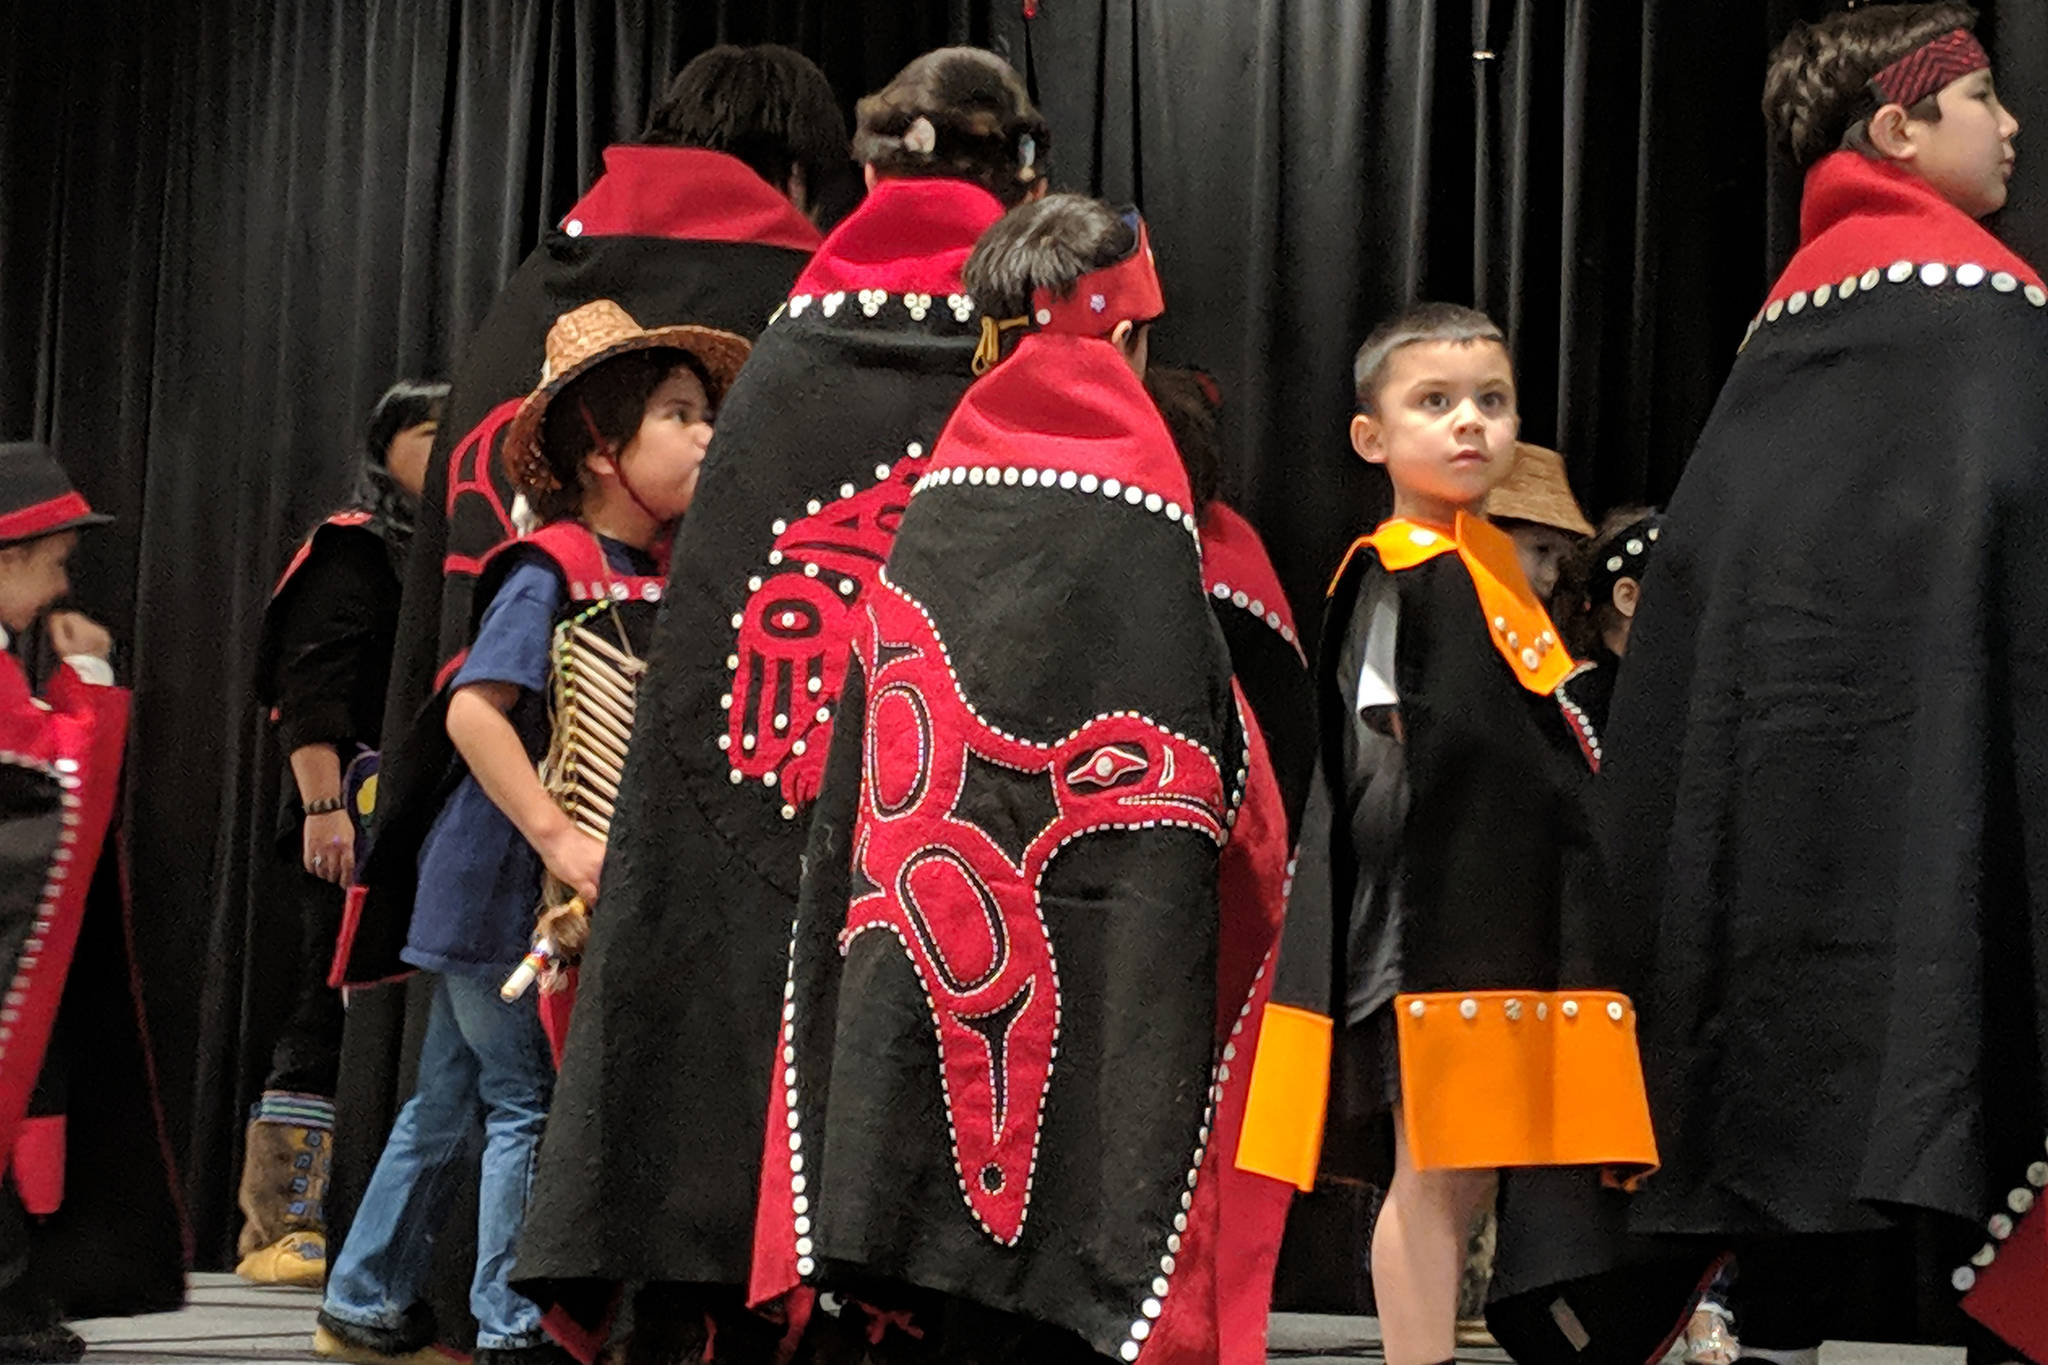 Culture celebrated with song, dance, art and more